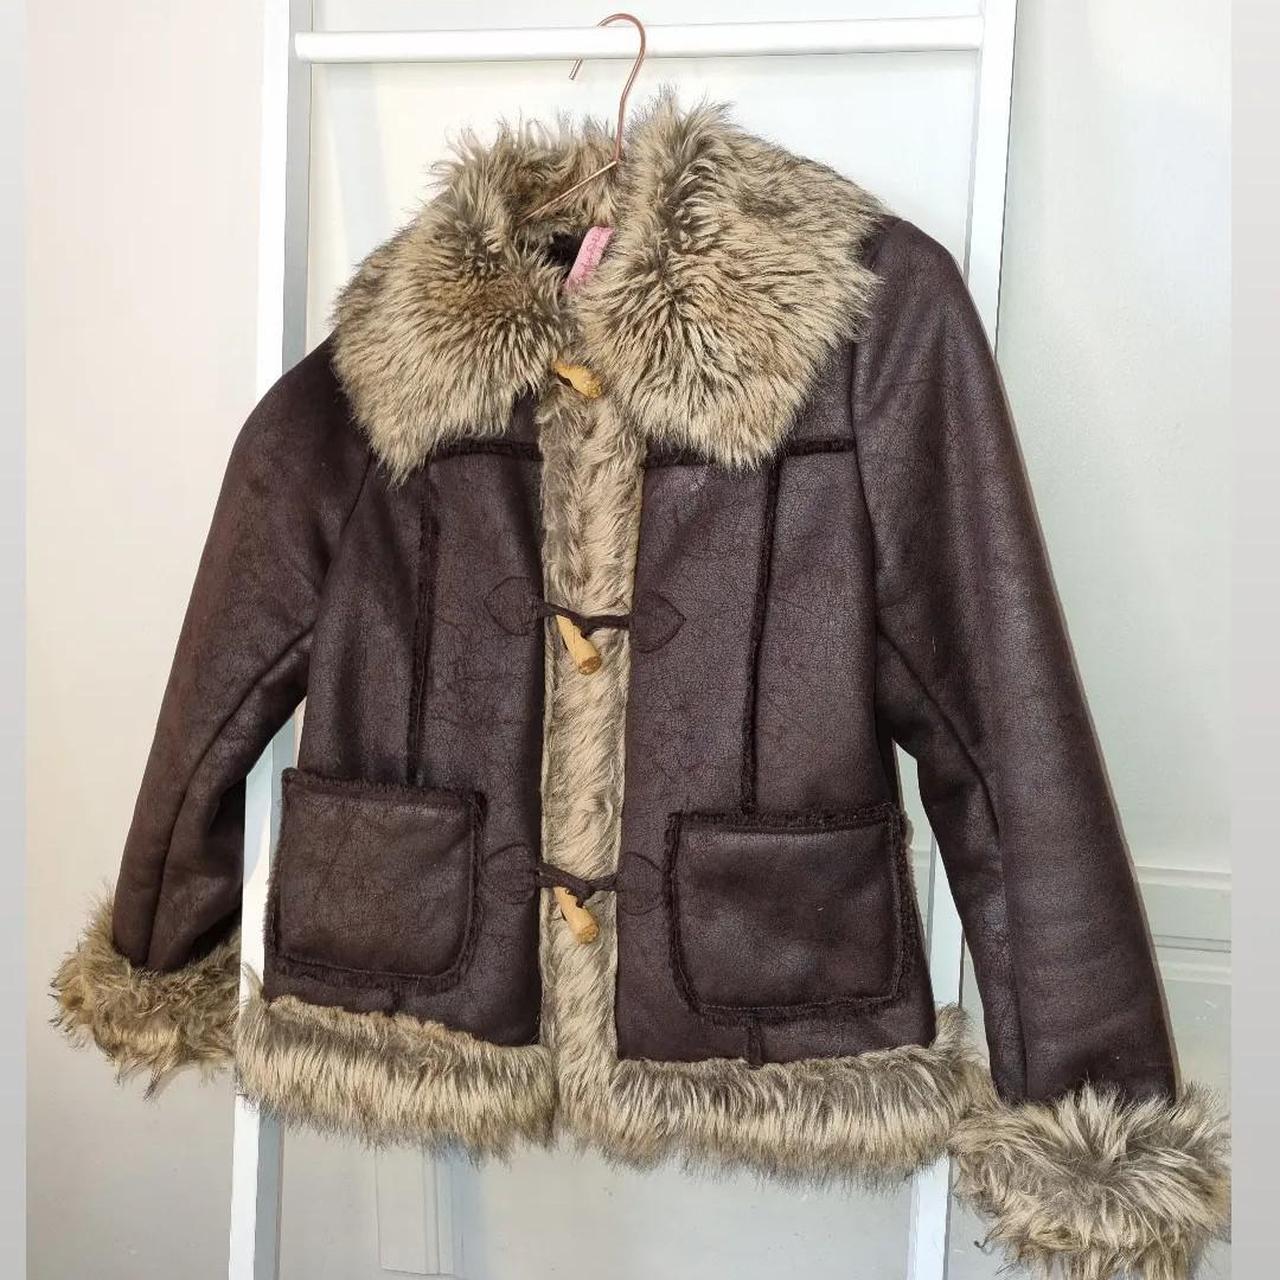 Vintage faux sheep skin coat. Great condition and... - Depop